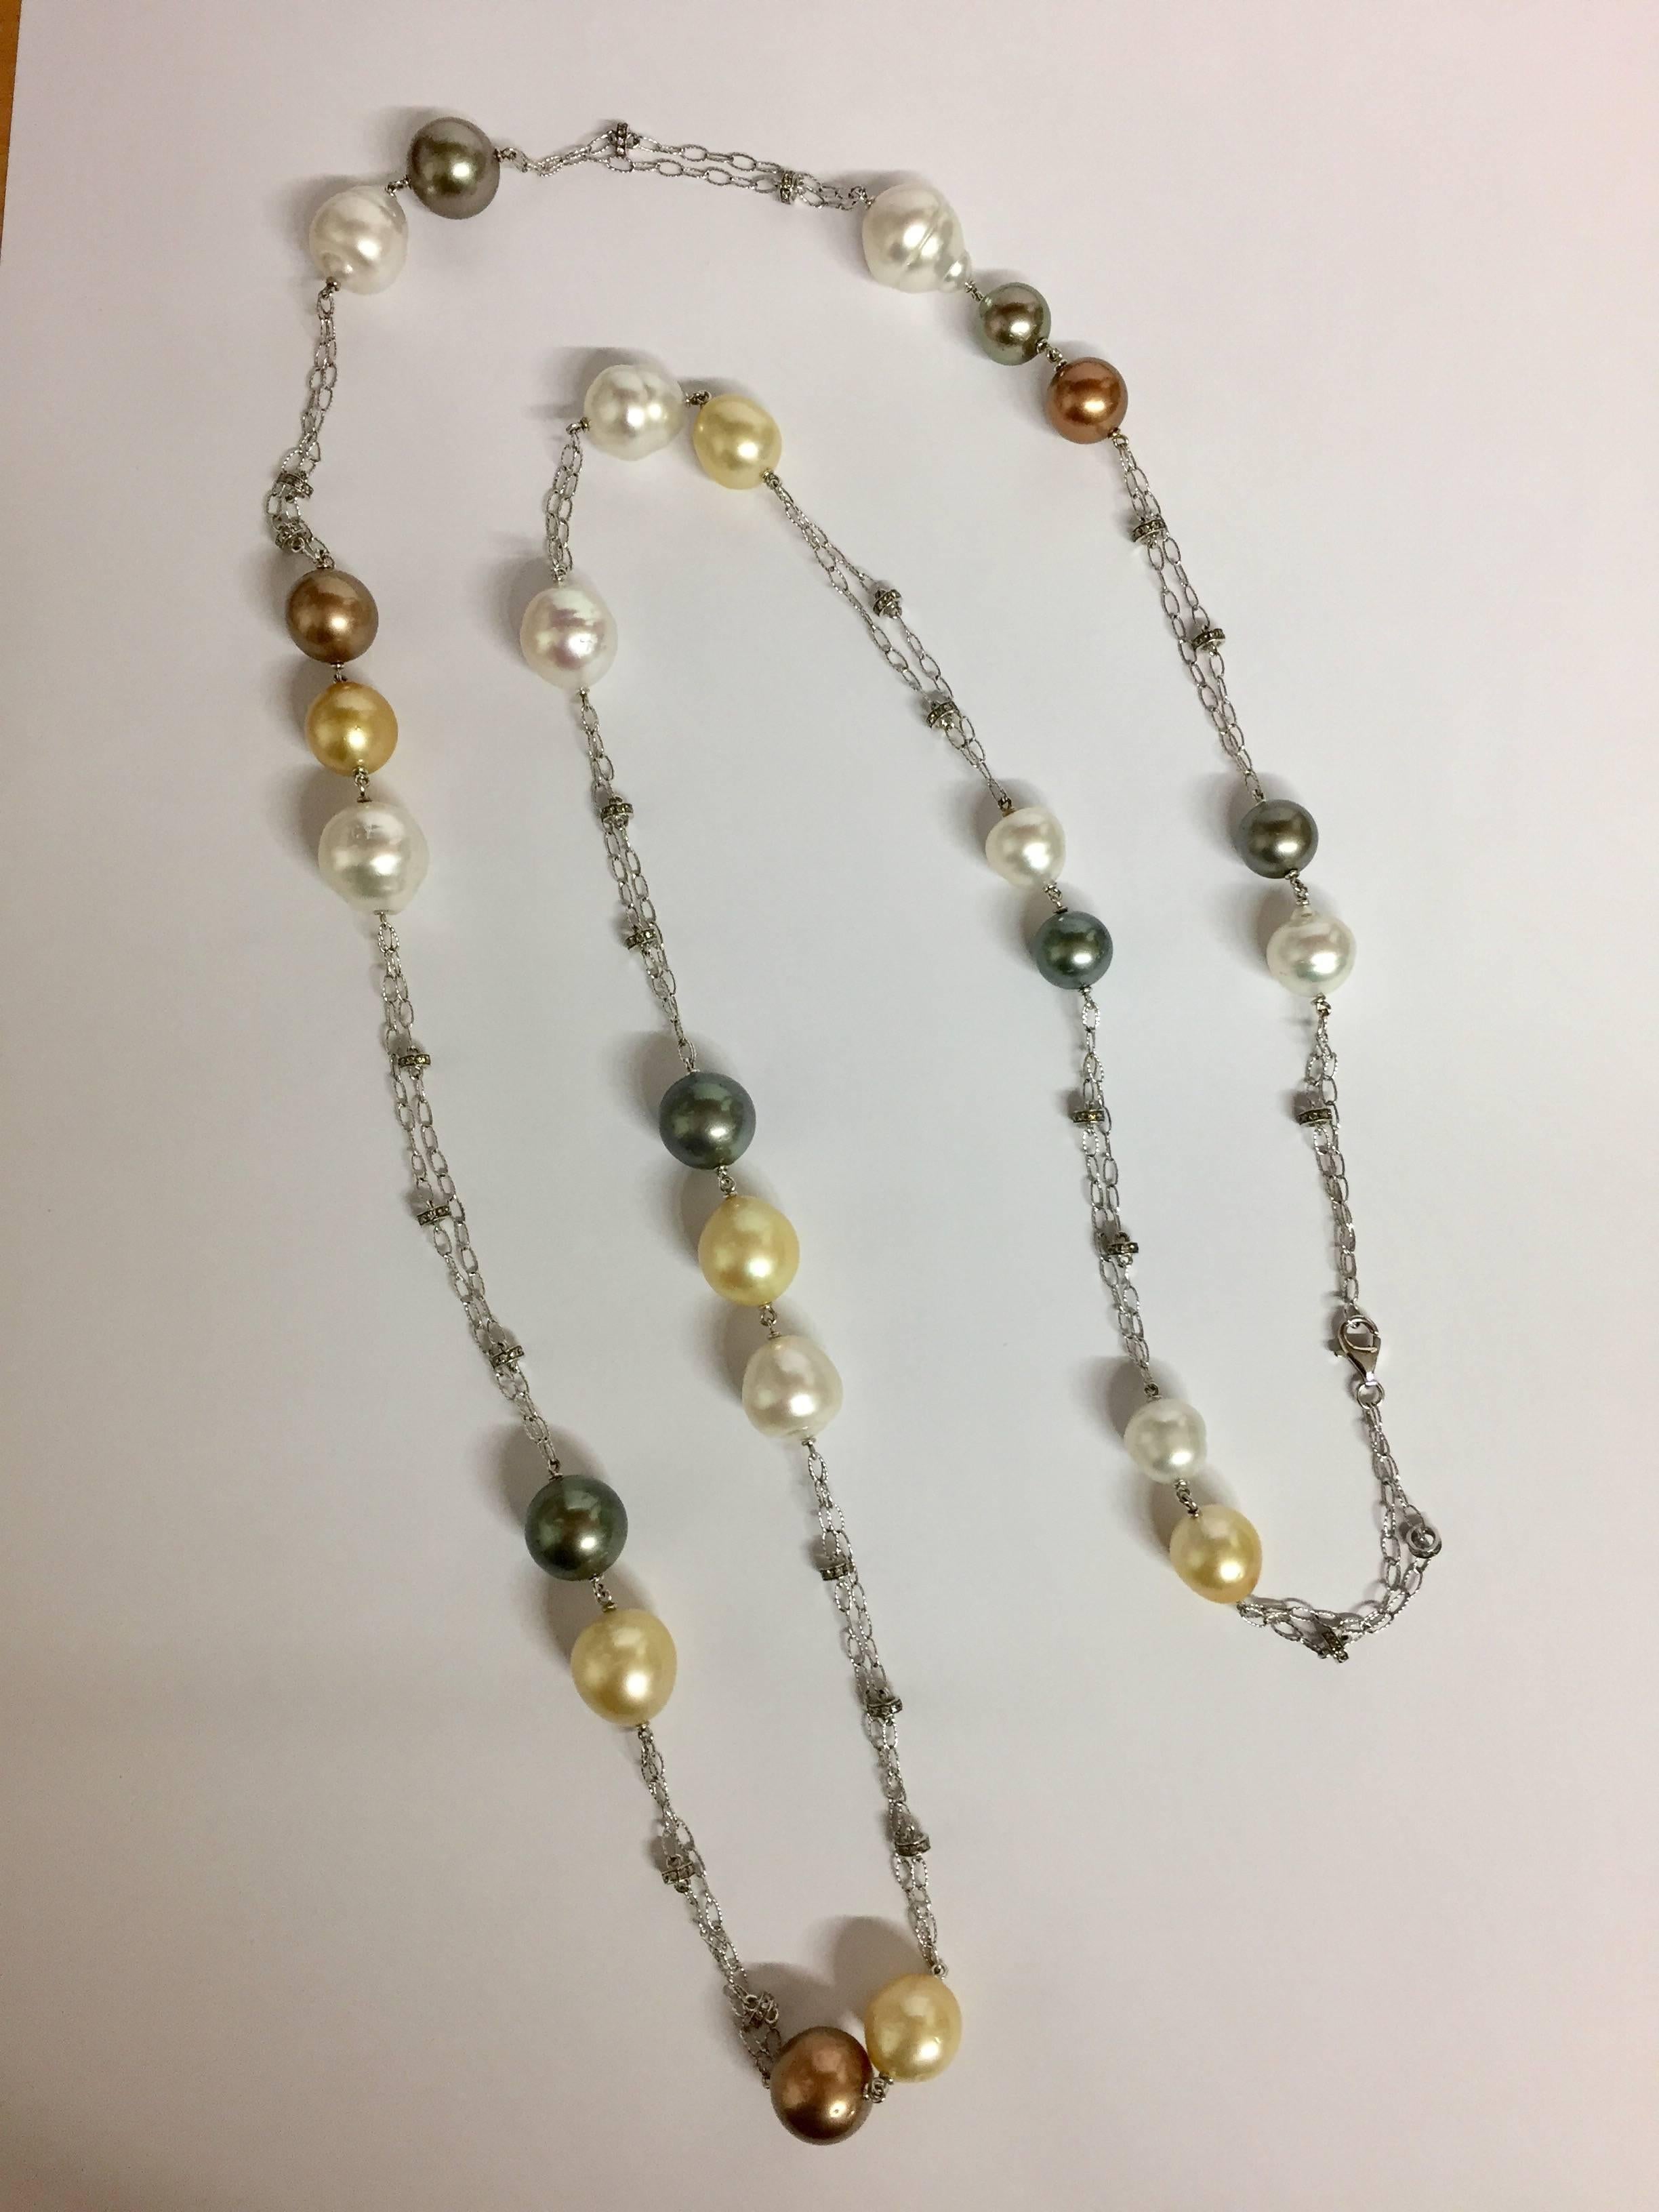 48 inch 14K white gold chain with 24 pieces 12-16 x 12-19mm multi color south sea pearl and 207 pieces full cut brown diamonds (1.45 carats).